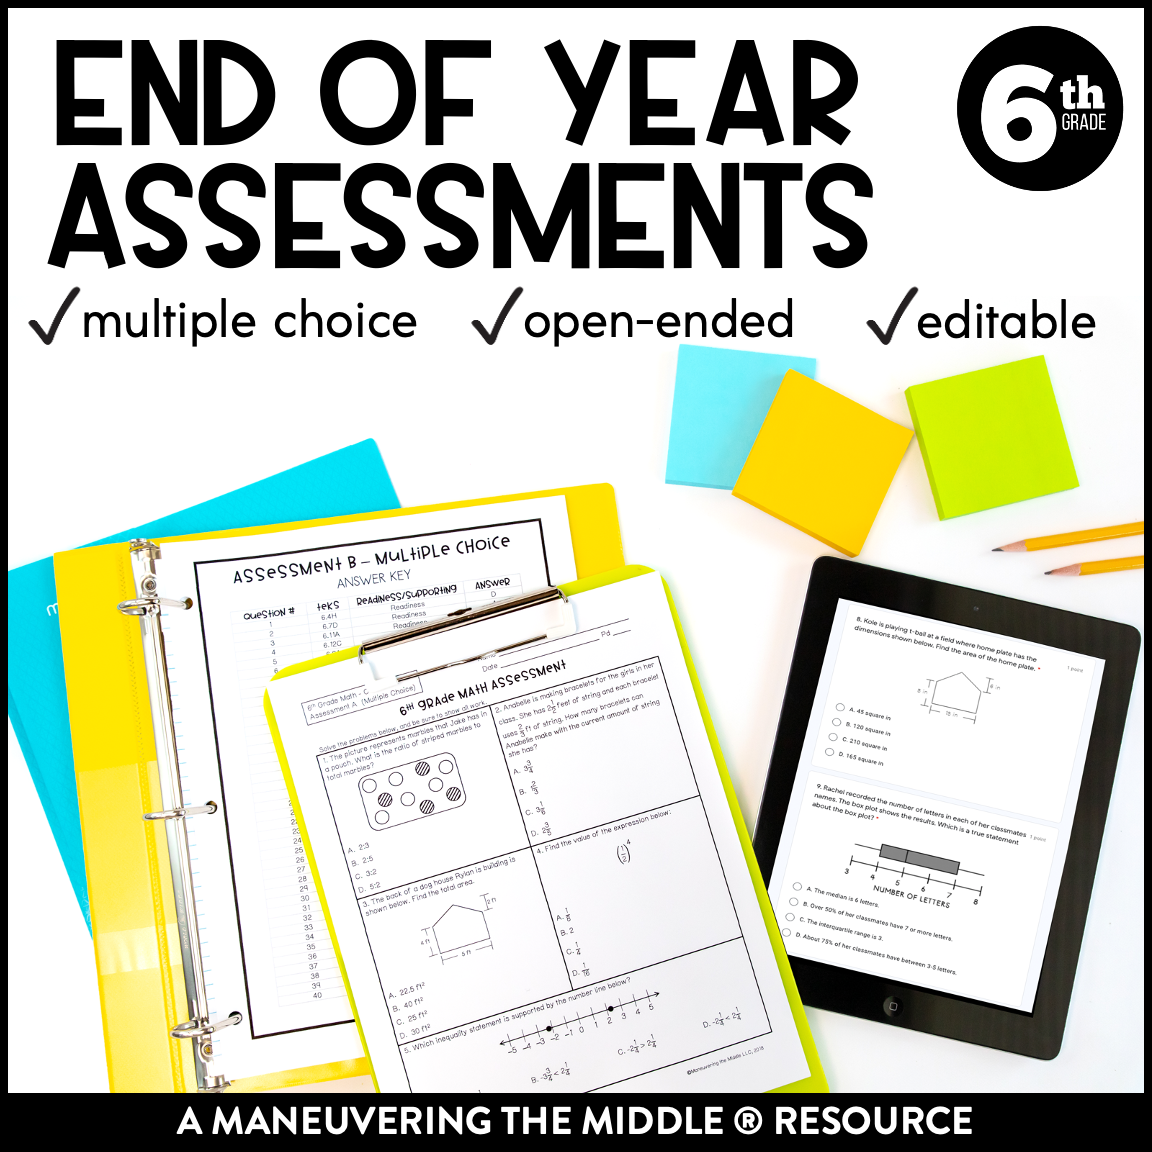 These comprehensive assessments cover the 6th grade Common Core Standards and are a great way to review, evaluate or practice test-taking skills. | maneuveringthemiddle.com